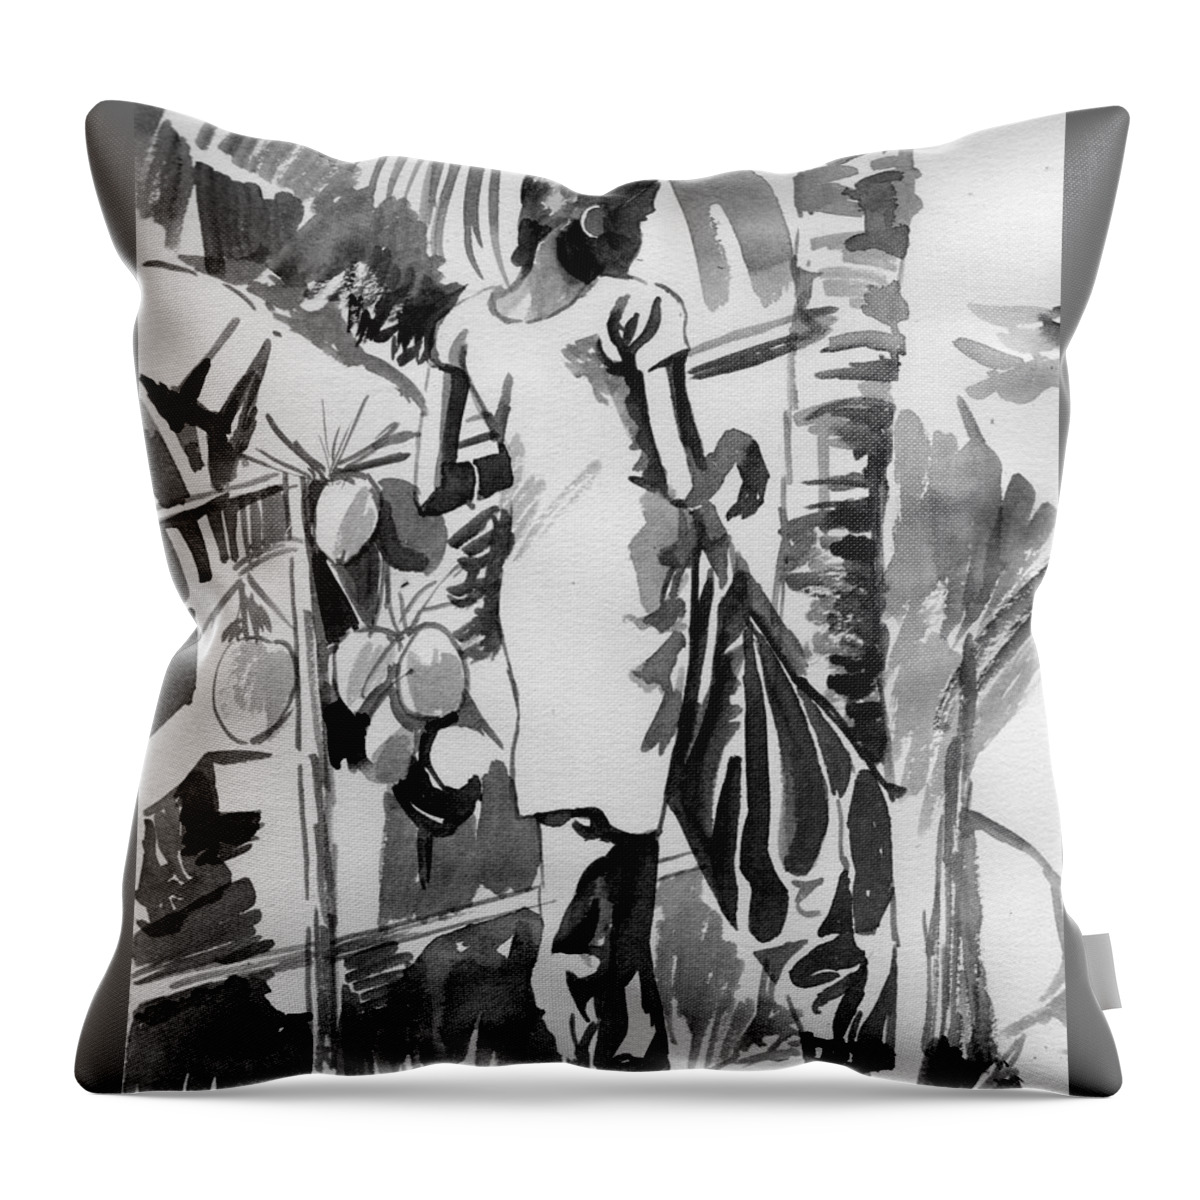 Alleppy Throw Pillow featuring the drawing Coconut Seller from Alleppy by Parag Pendharkar